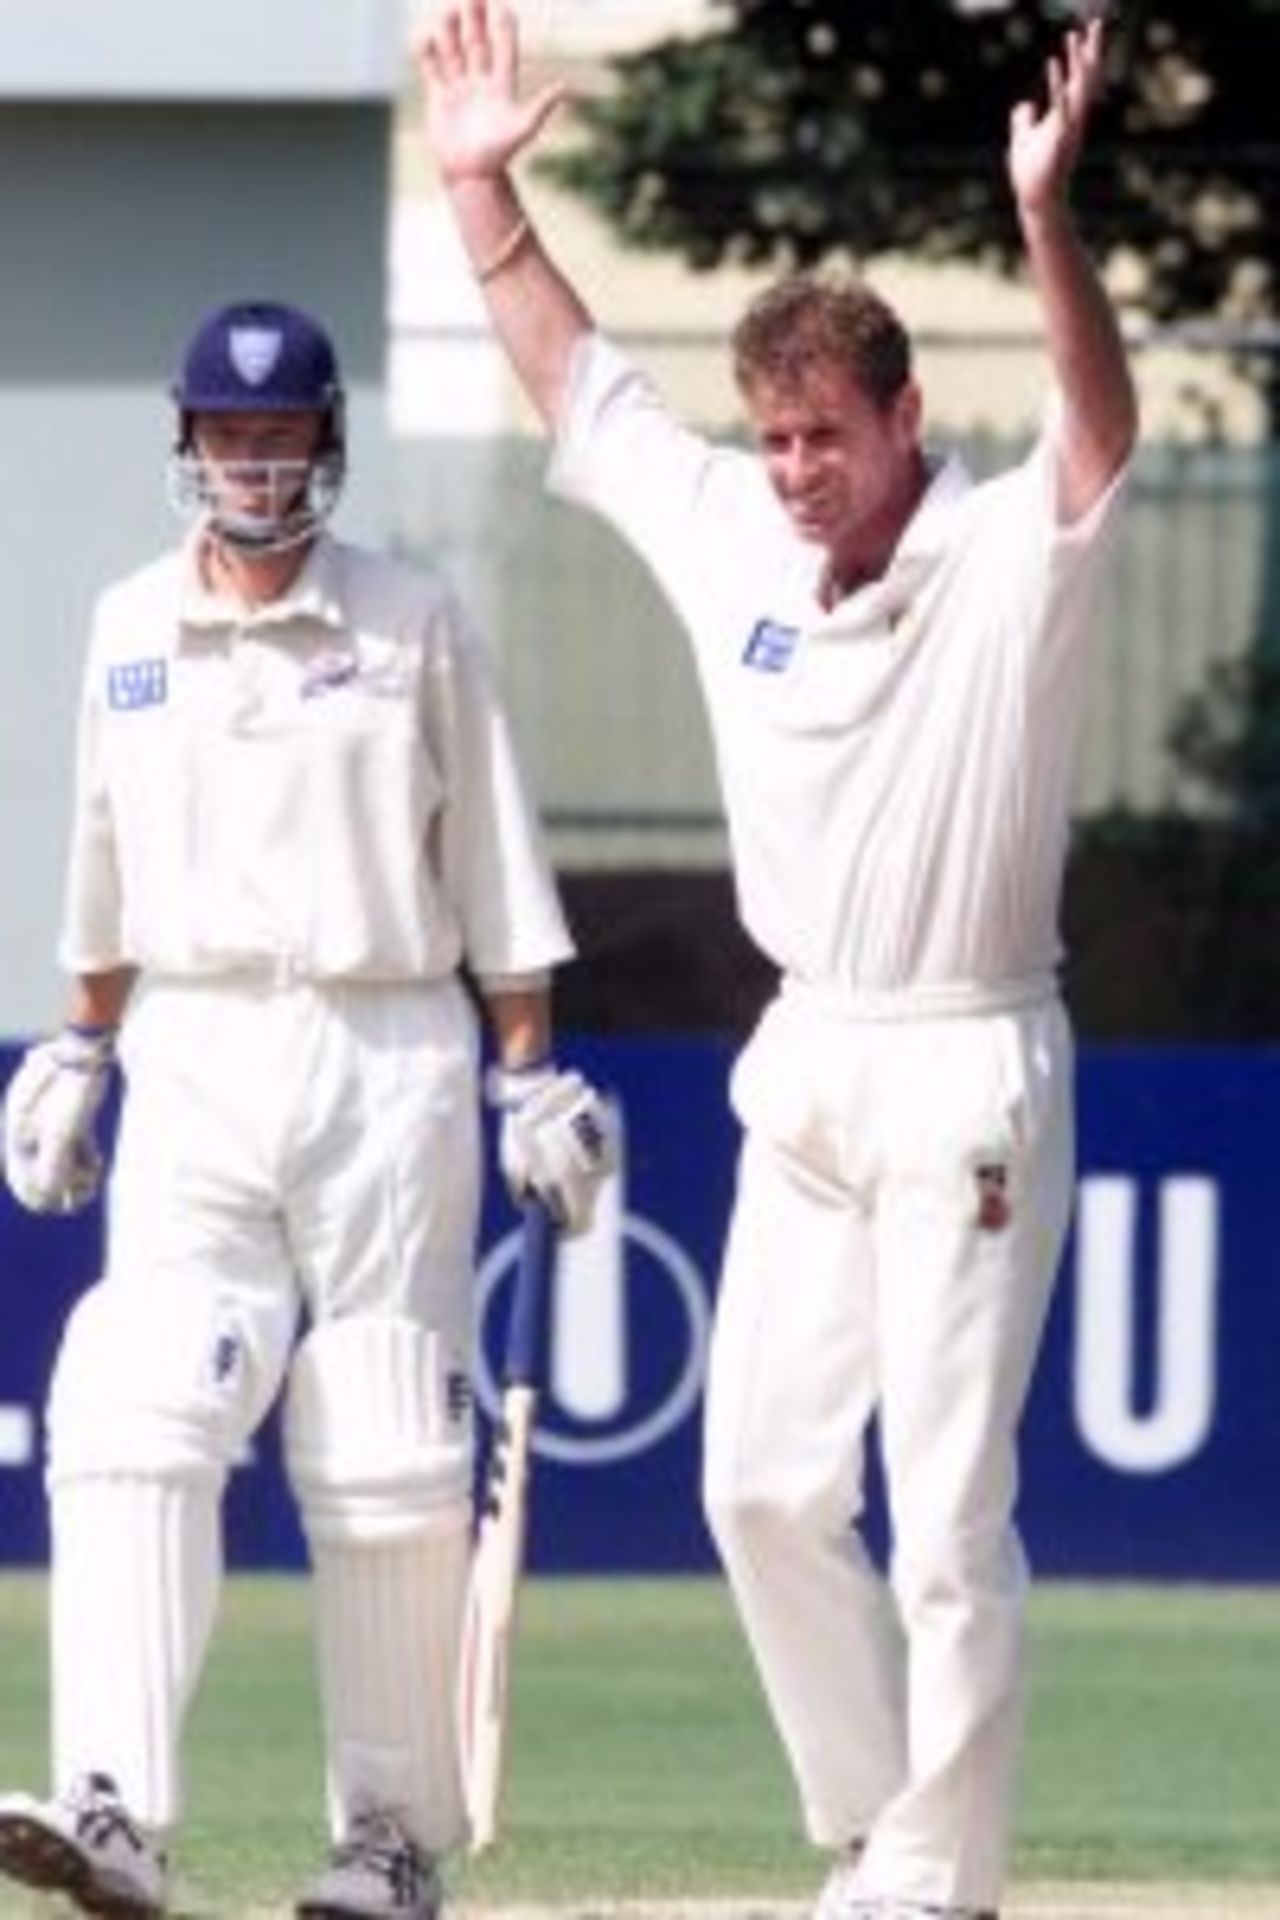 4 March 2000: Paul Reiffel from Victoria is jubilant after taking the LBW wicket of Brett Van Deinsen from New South Wales during the match Between N.S.W. and Victoria at the Punt Road Oval, Melbourne Australia.